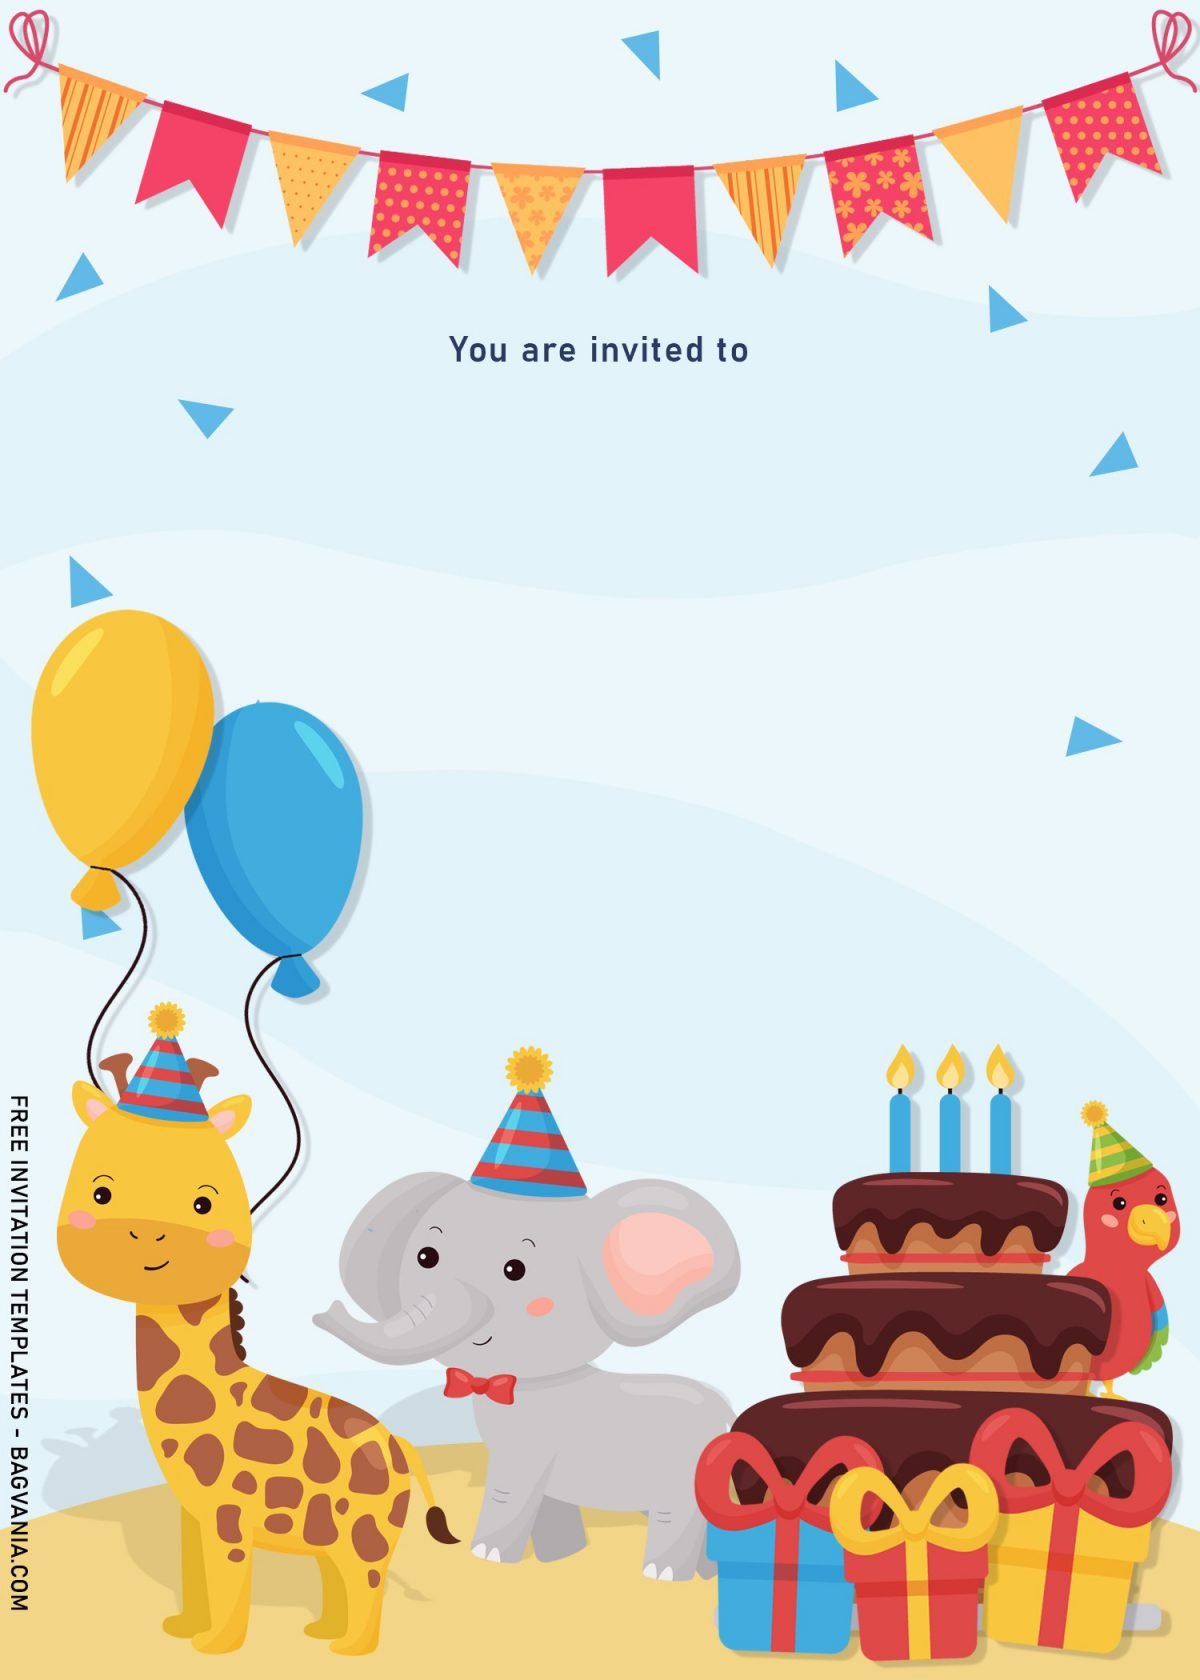 8+ Cute Woodland Animals Birthday Invitation Templates and has Bunting flags